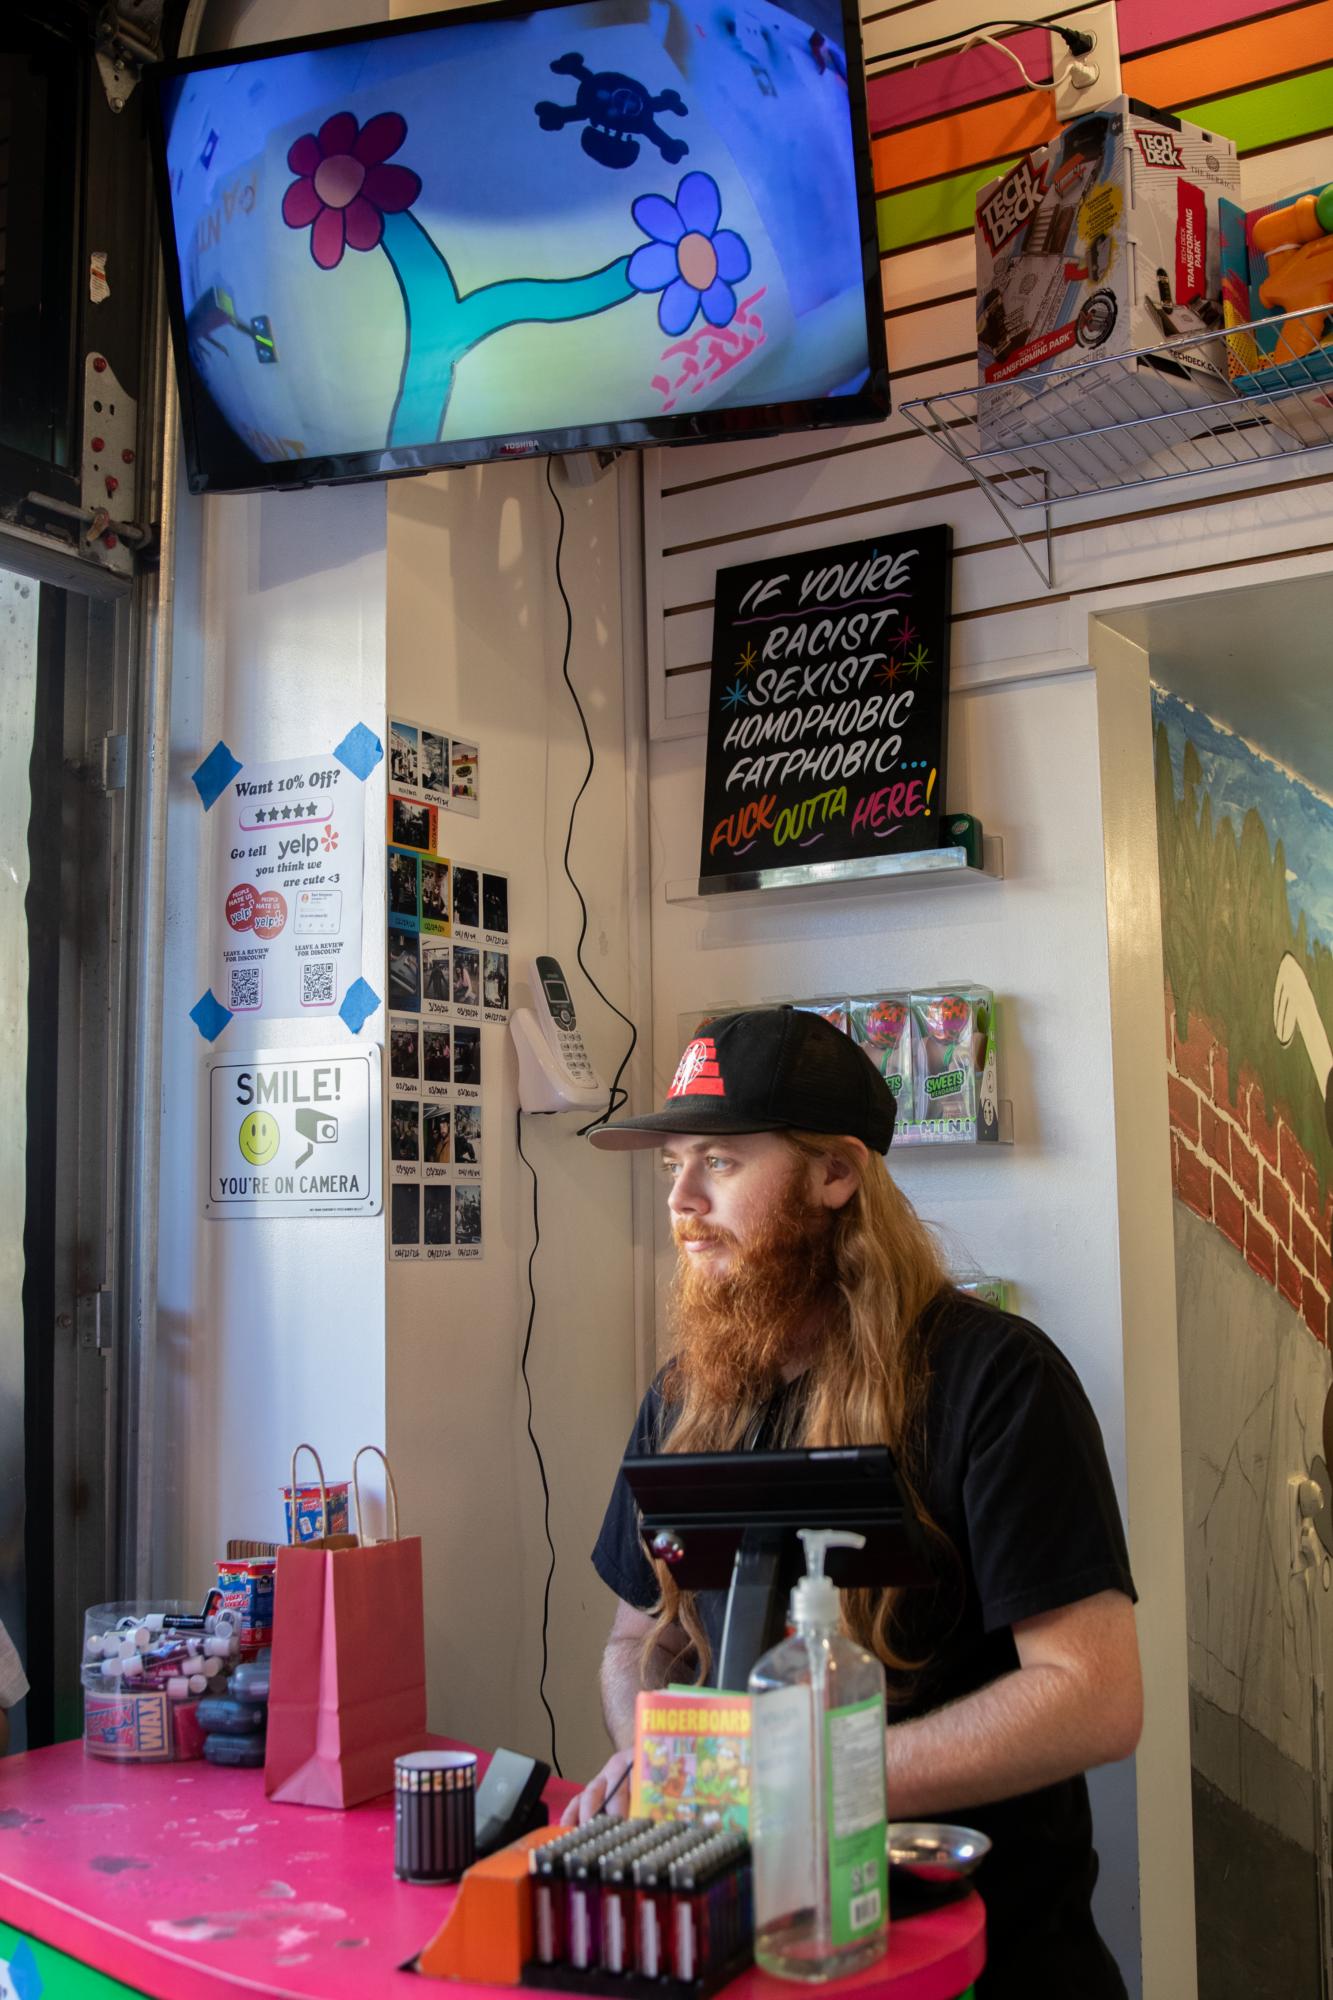 Two images sit side-by-side. On the left, is the store's cashier standing at the register. On the right, is a young man showing off his mini skateboard moves.